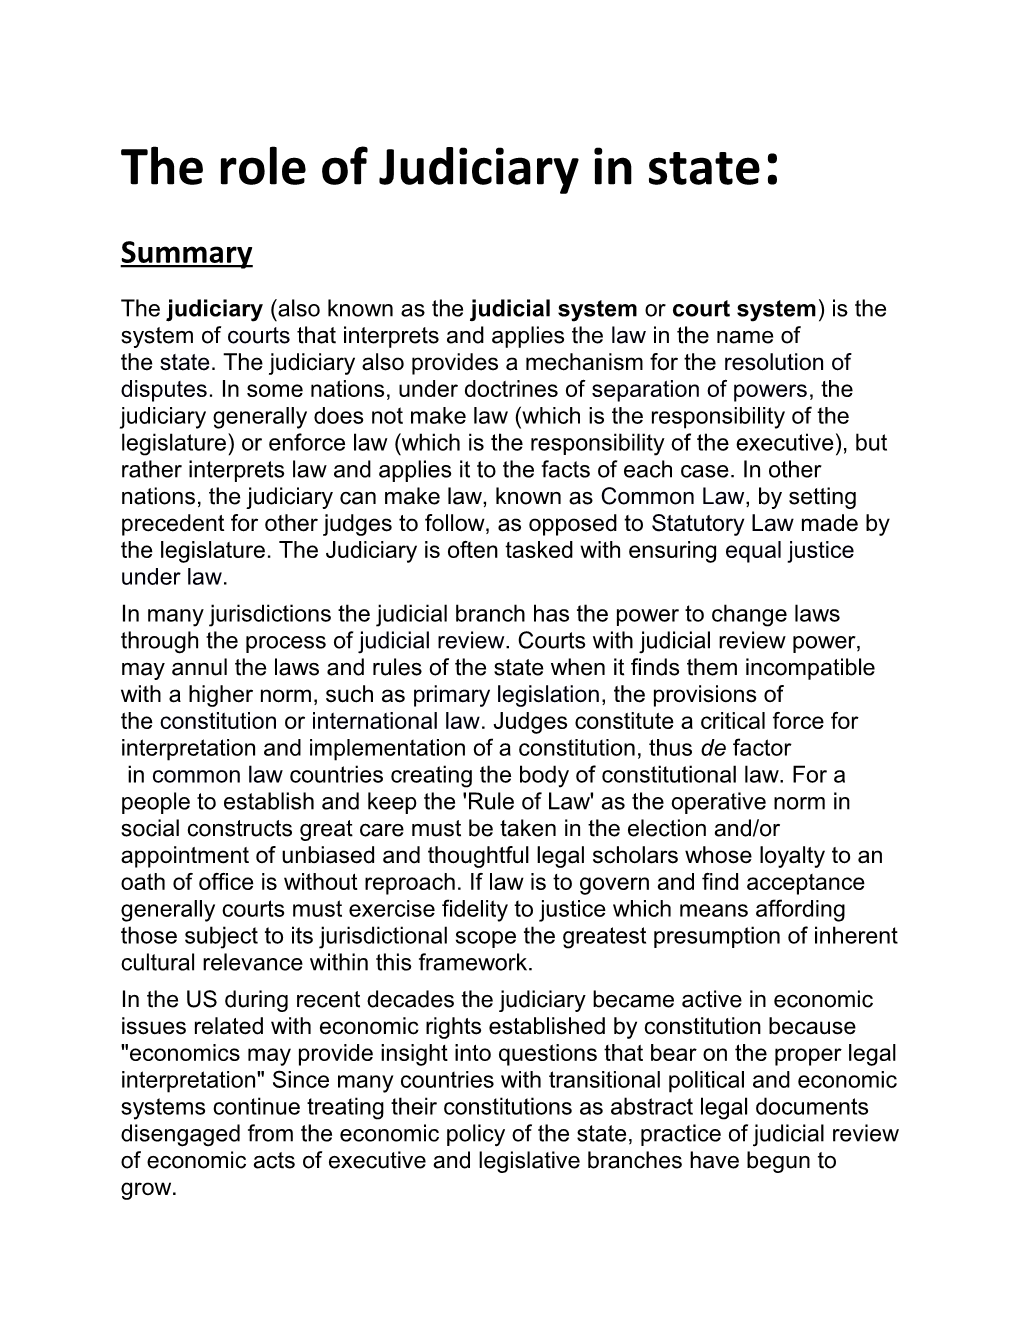 The Role of Judiciary in State